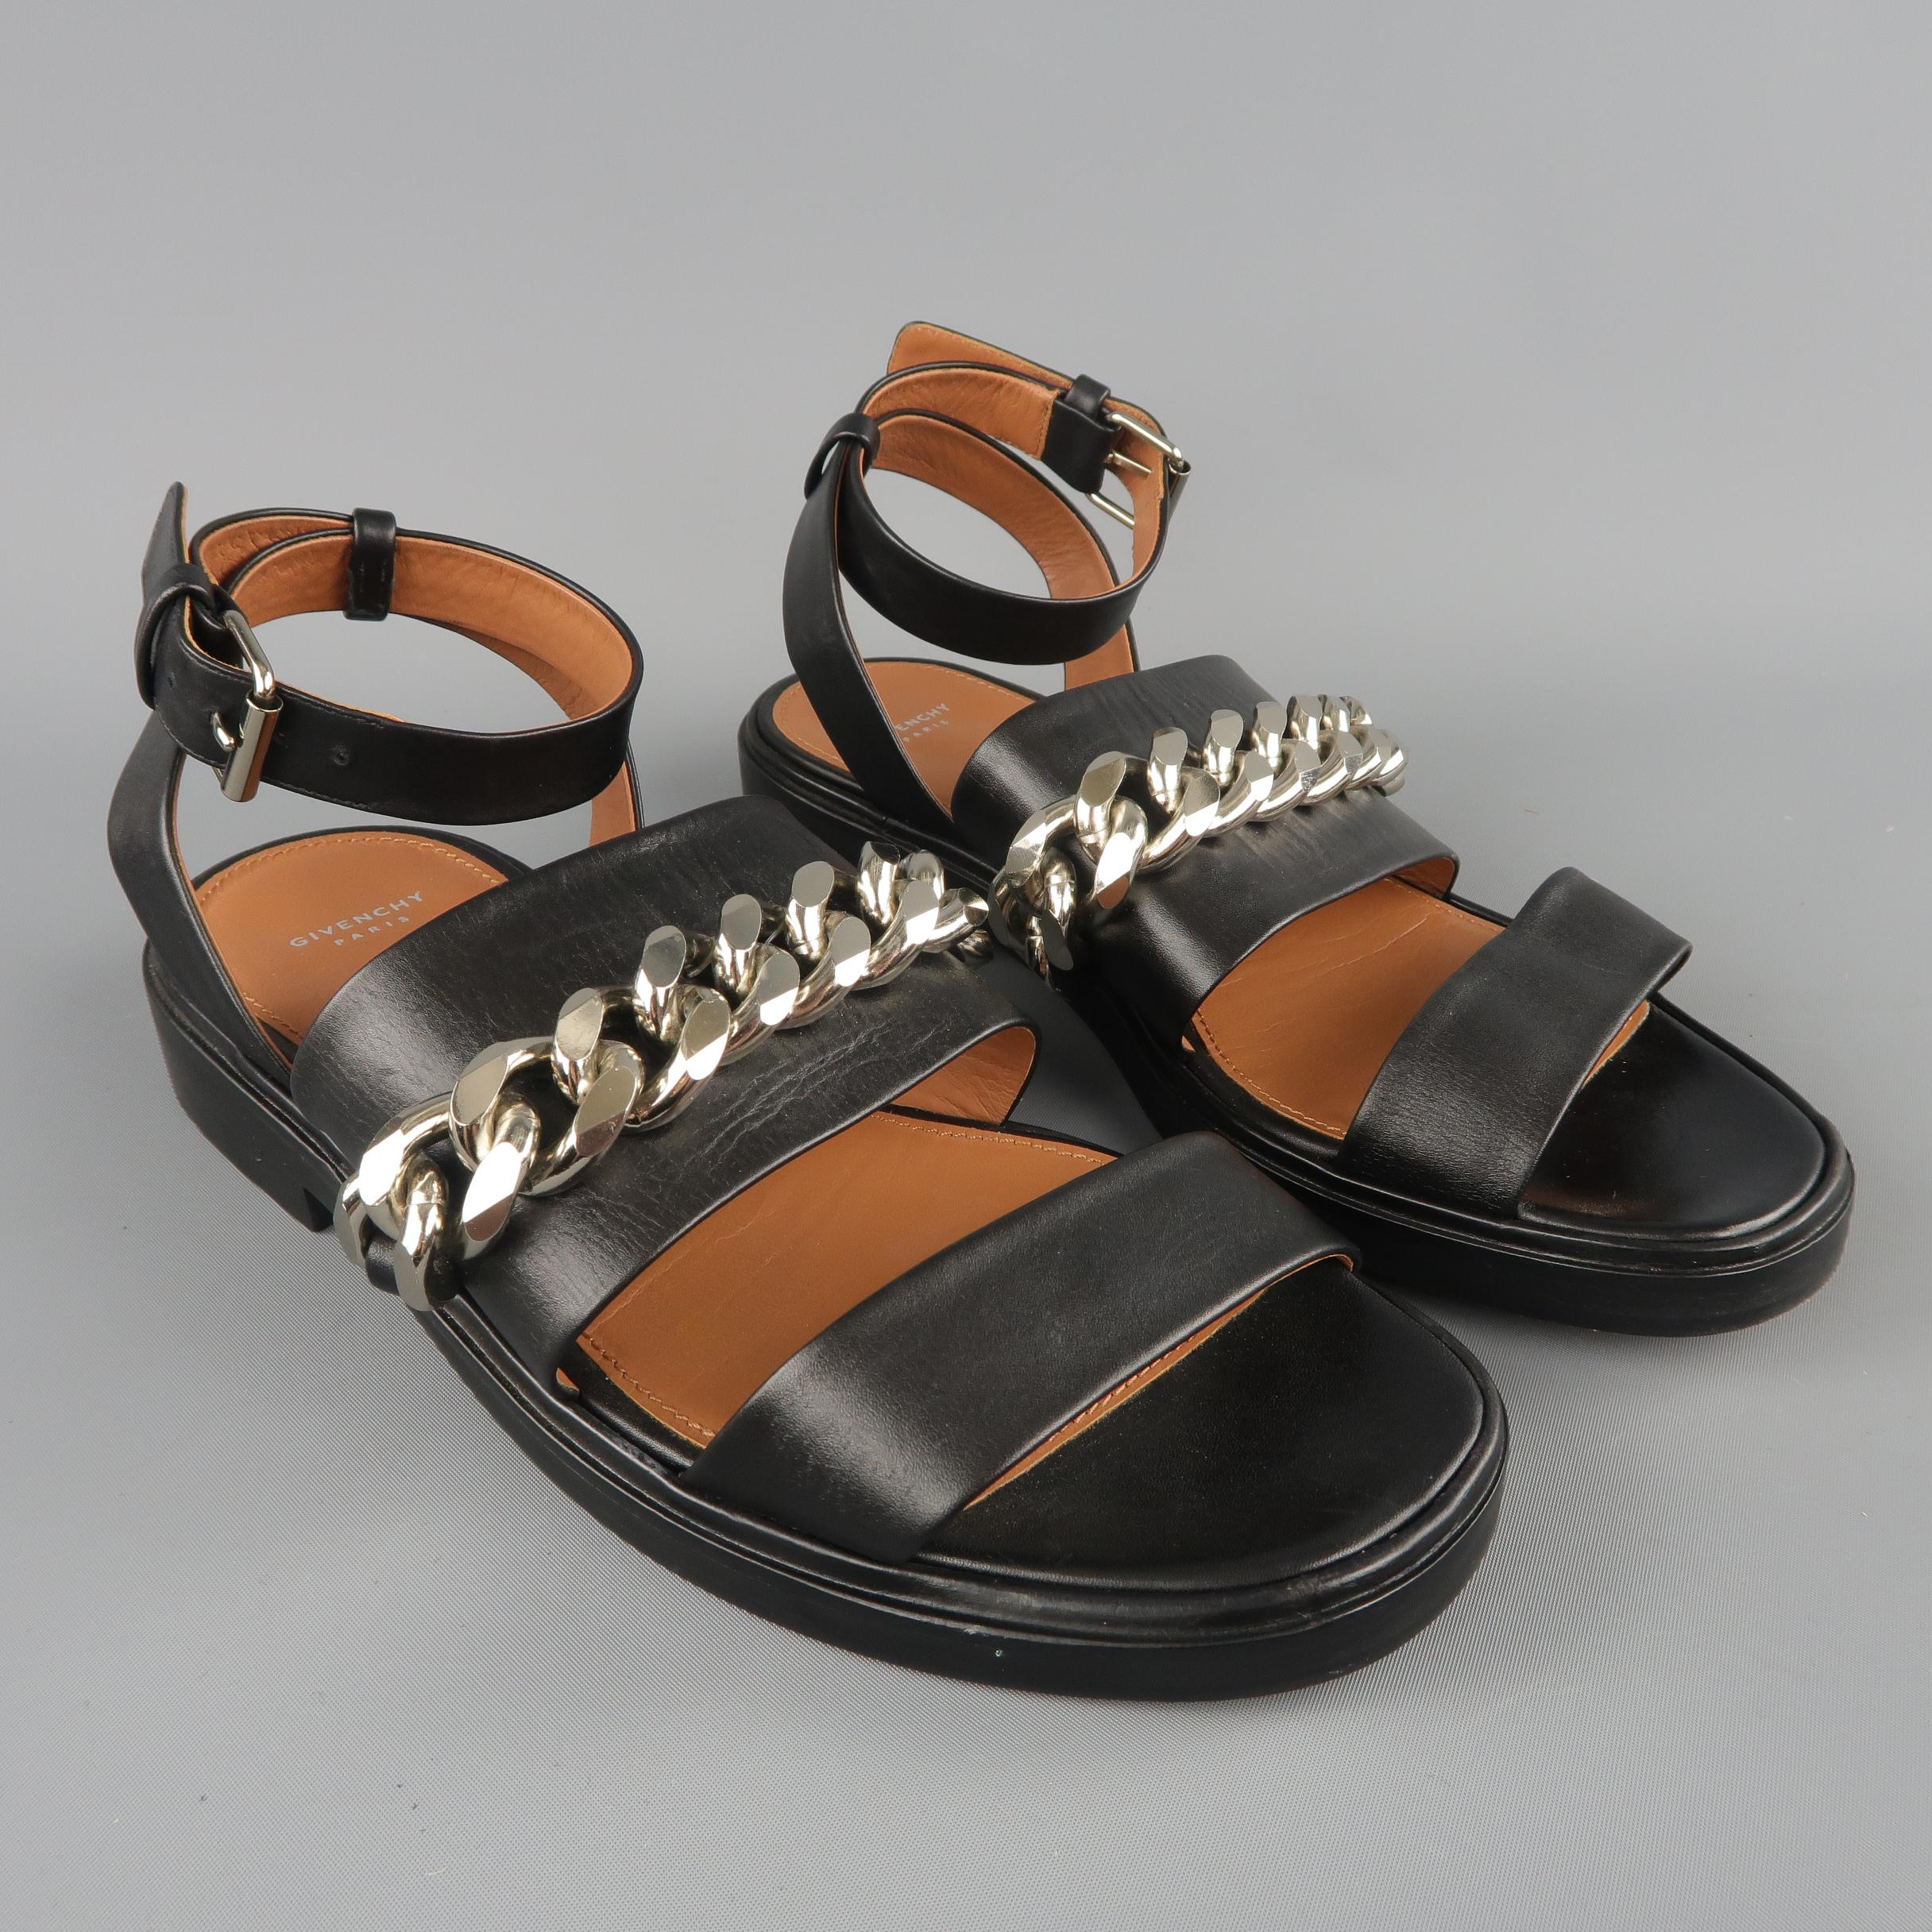 GIVENCHY by RICCARDO TISCI sandals feature two thick black leather straps with an oversized silver tone curb chain embellishment and wrapped ankle strap. With box. Made in Italy.
Excellent Pre-Owned Condition.
Marked: IT 38
 
Outsole: 10 x 4 in.